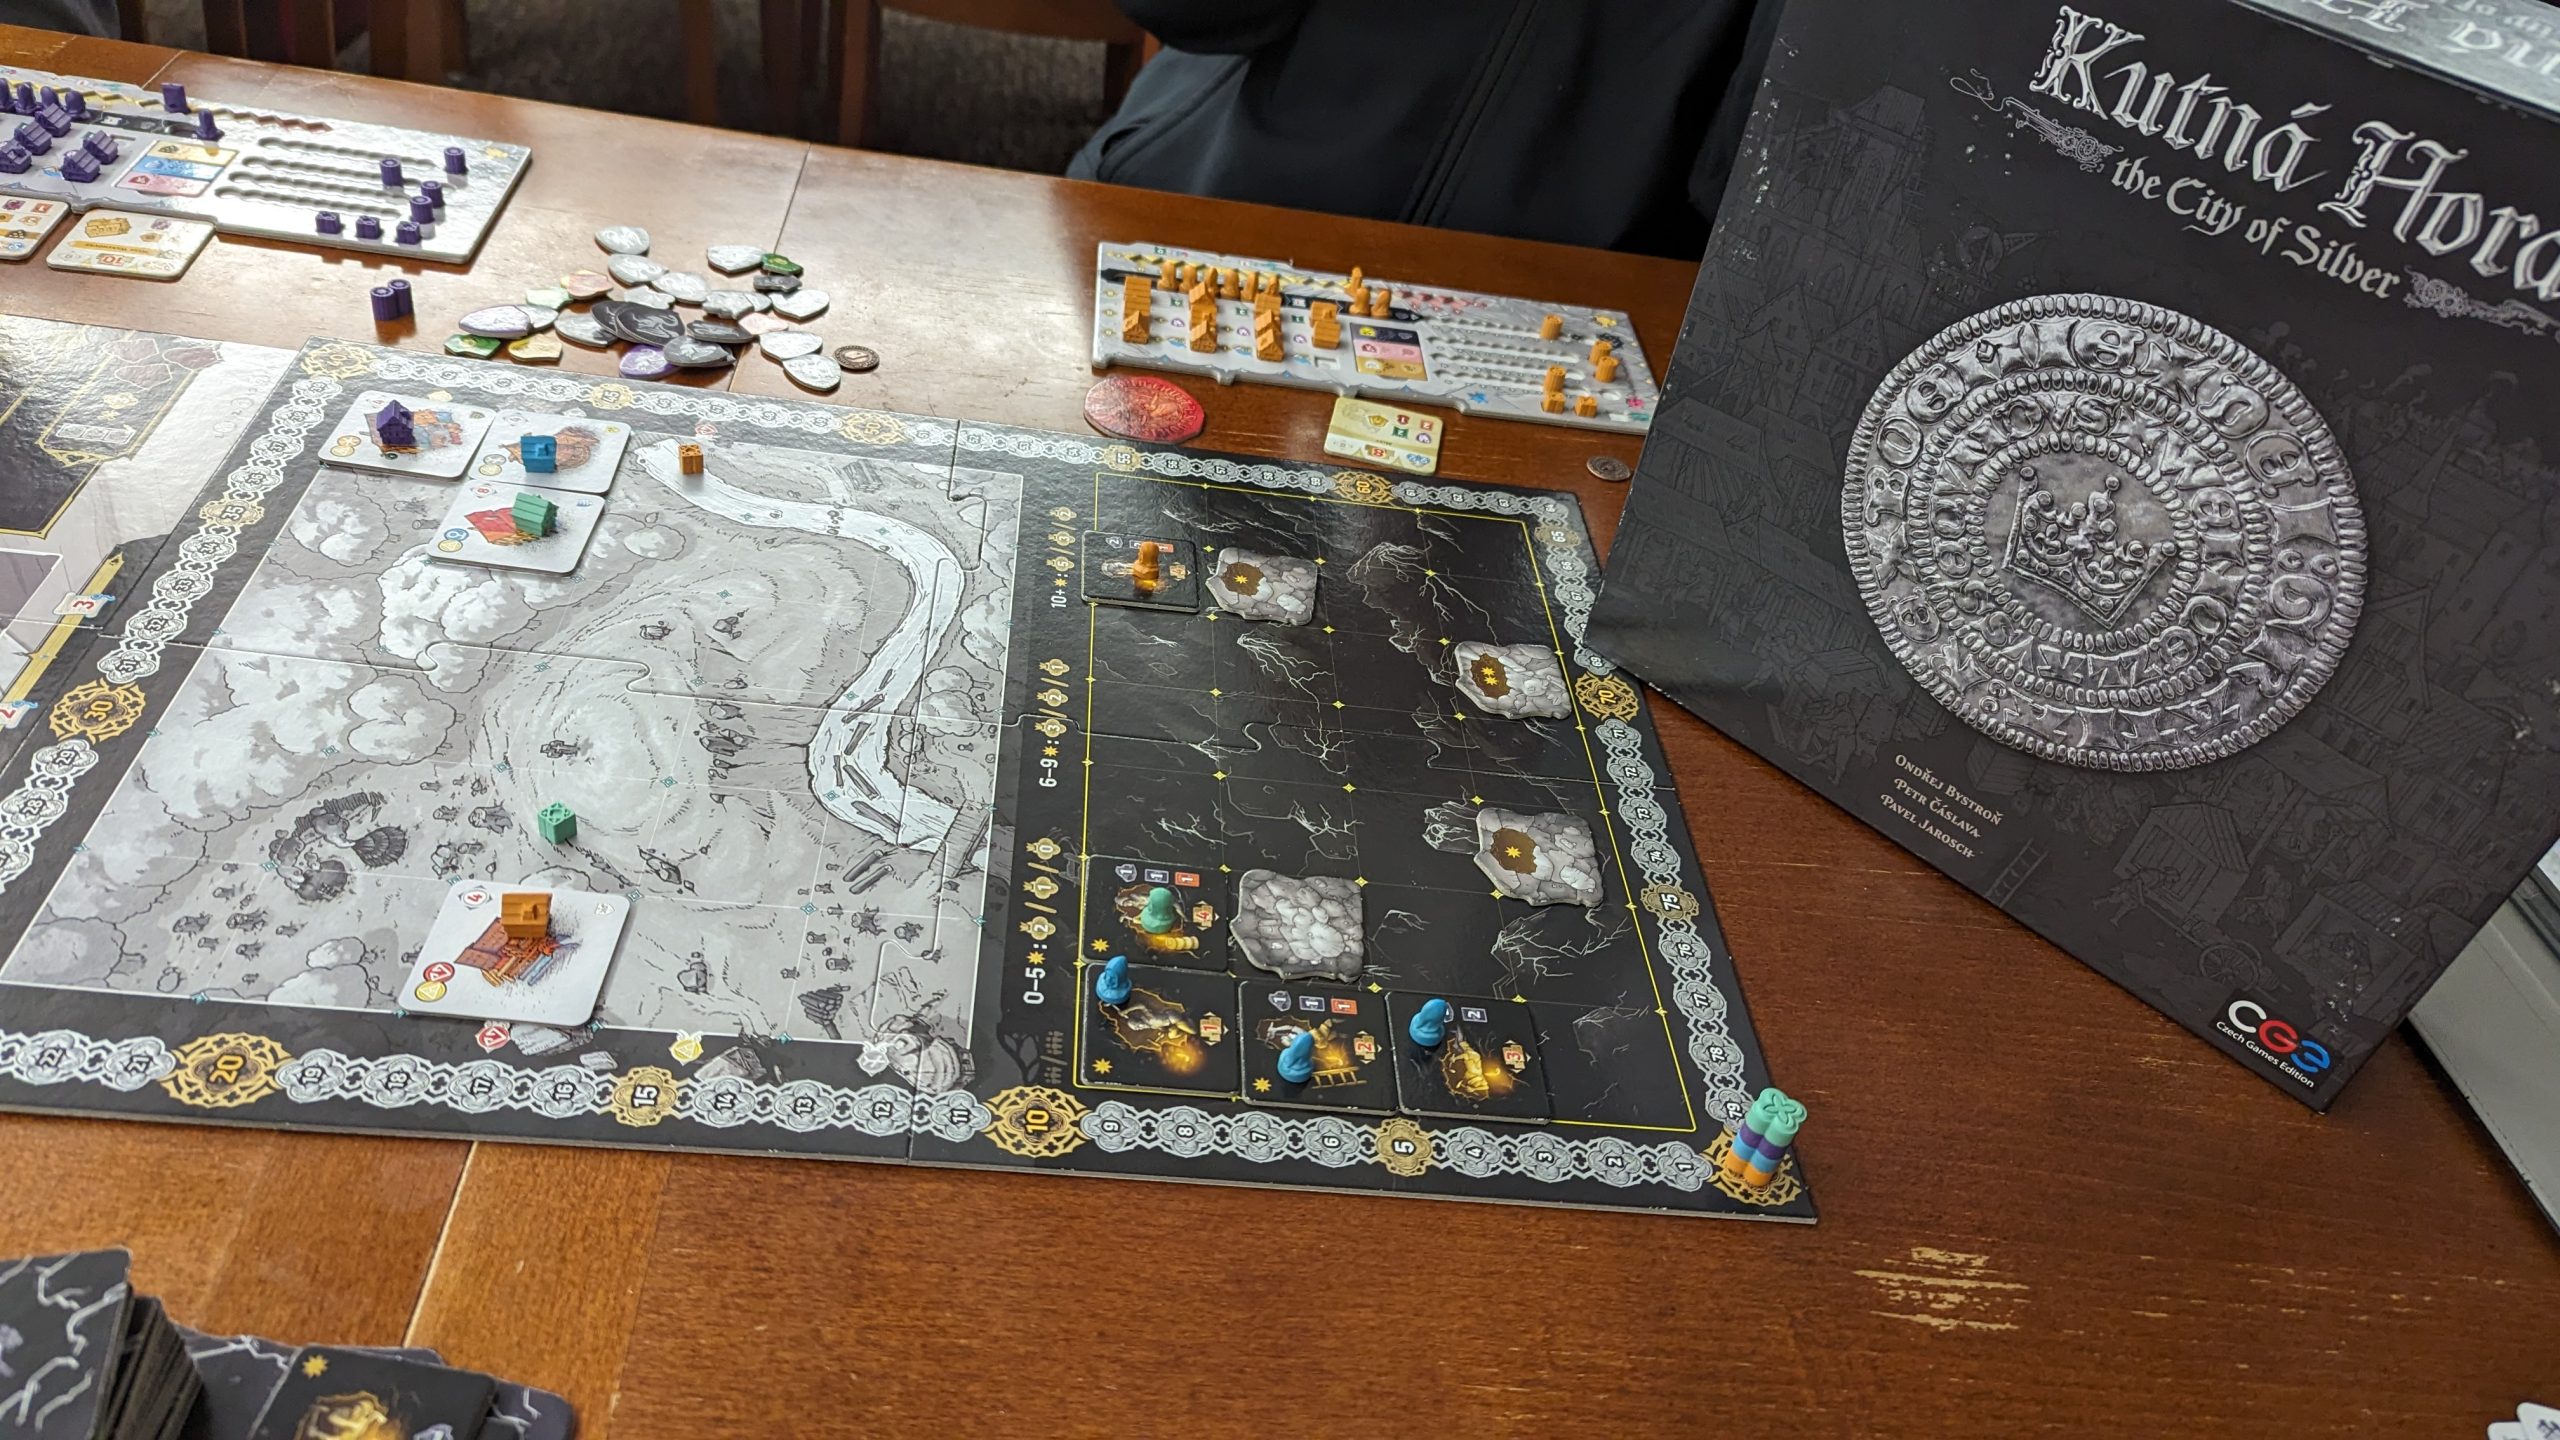 Kutnà Hora: The City of Silver review — Silver is the new brass